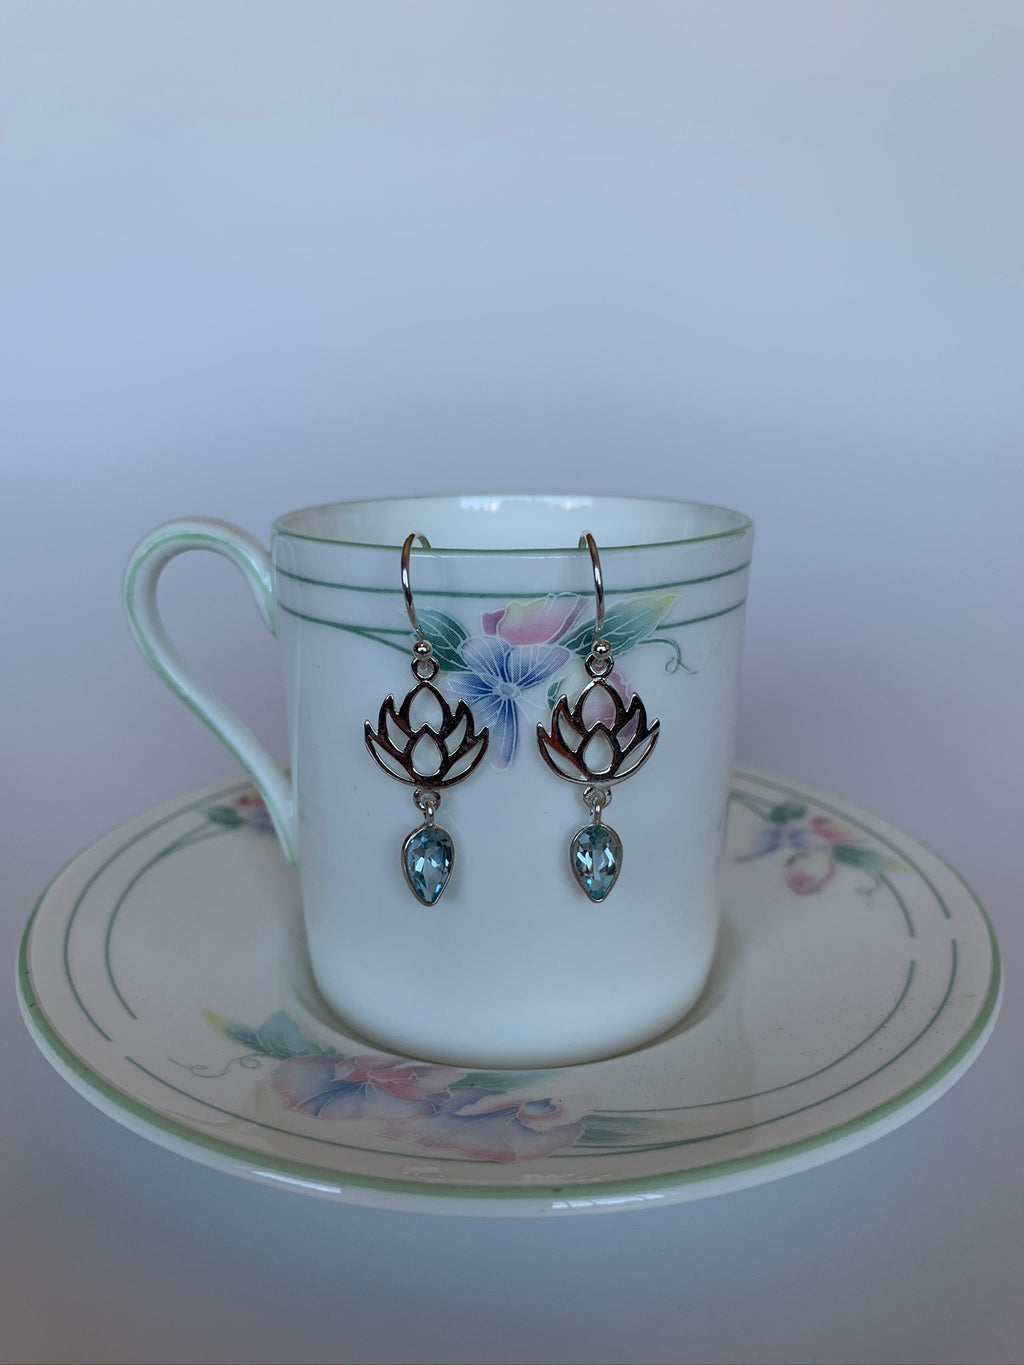 Sterling silver earrings with earring wires, not posts.  A blue topaz (reverse teardrop) hangs from a sterling silver lotus design. Earrings are lightweight and are approximately 1½" long.